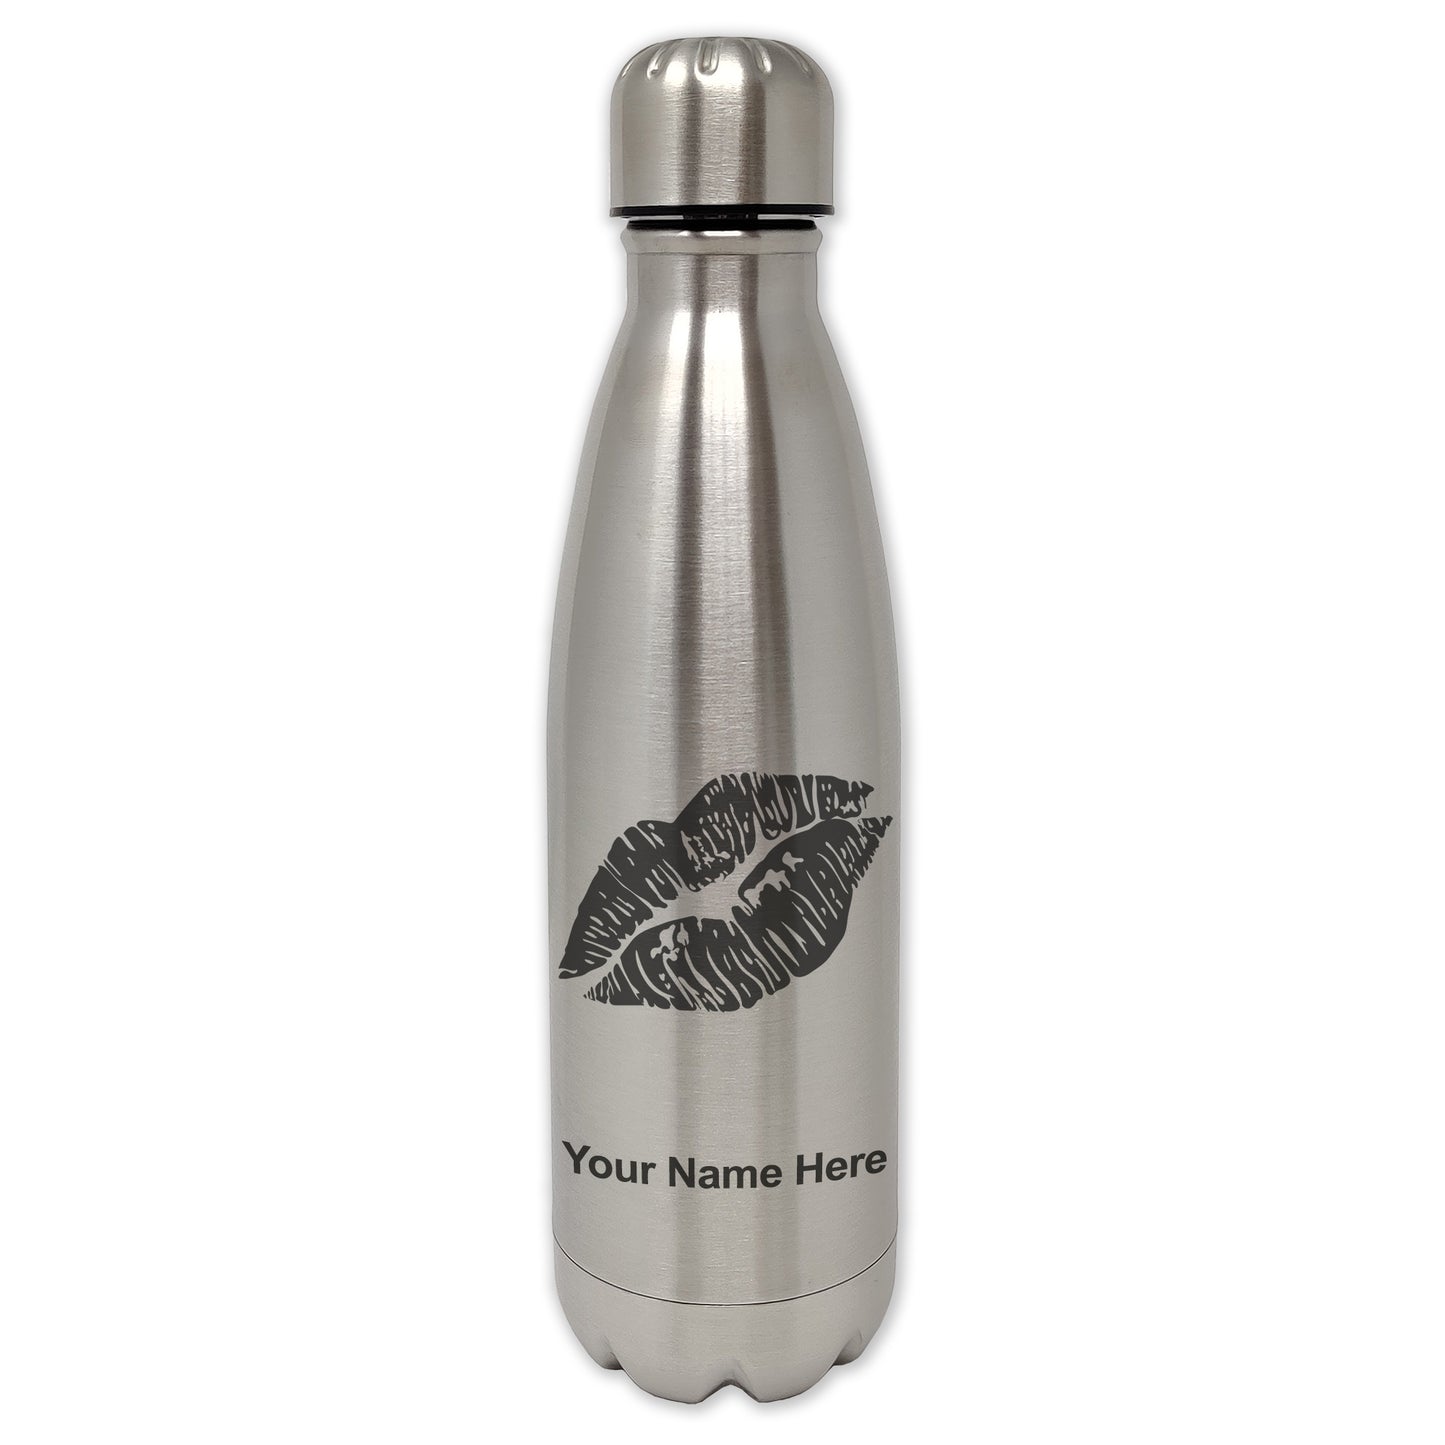 LaserGram Single Wall Water Bottle, Lipstick Kiss, Personalized Engraving Included